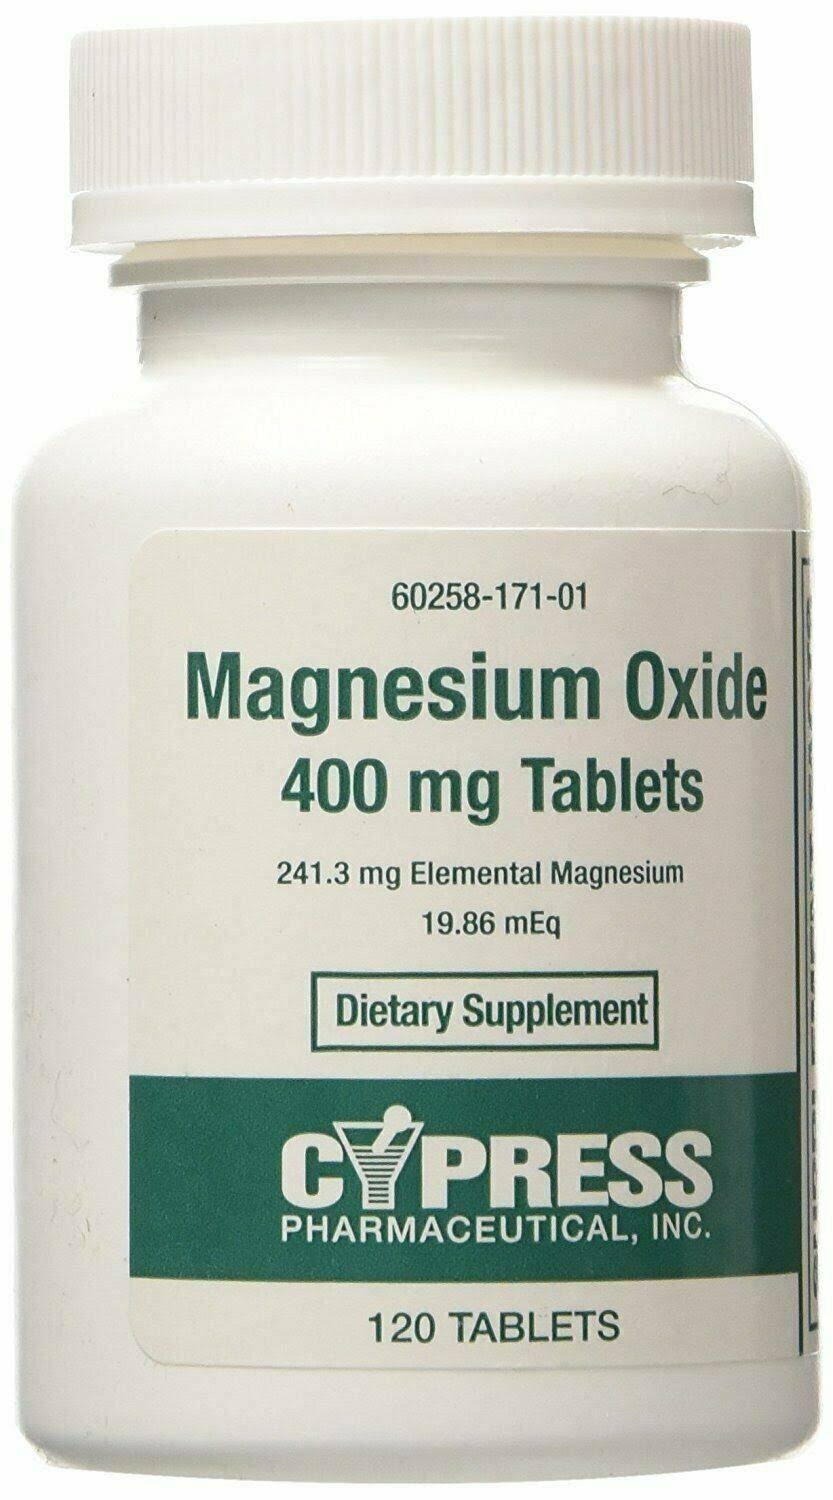 Cypress Pharmaceutical Magnesium Oxide 400 mg, 120 Tablets per Bottle, 4 Pack